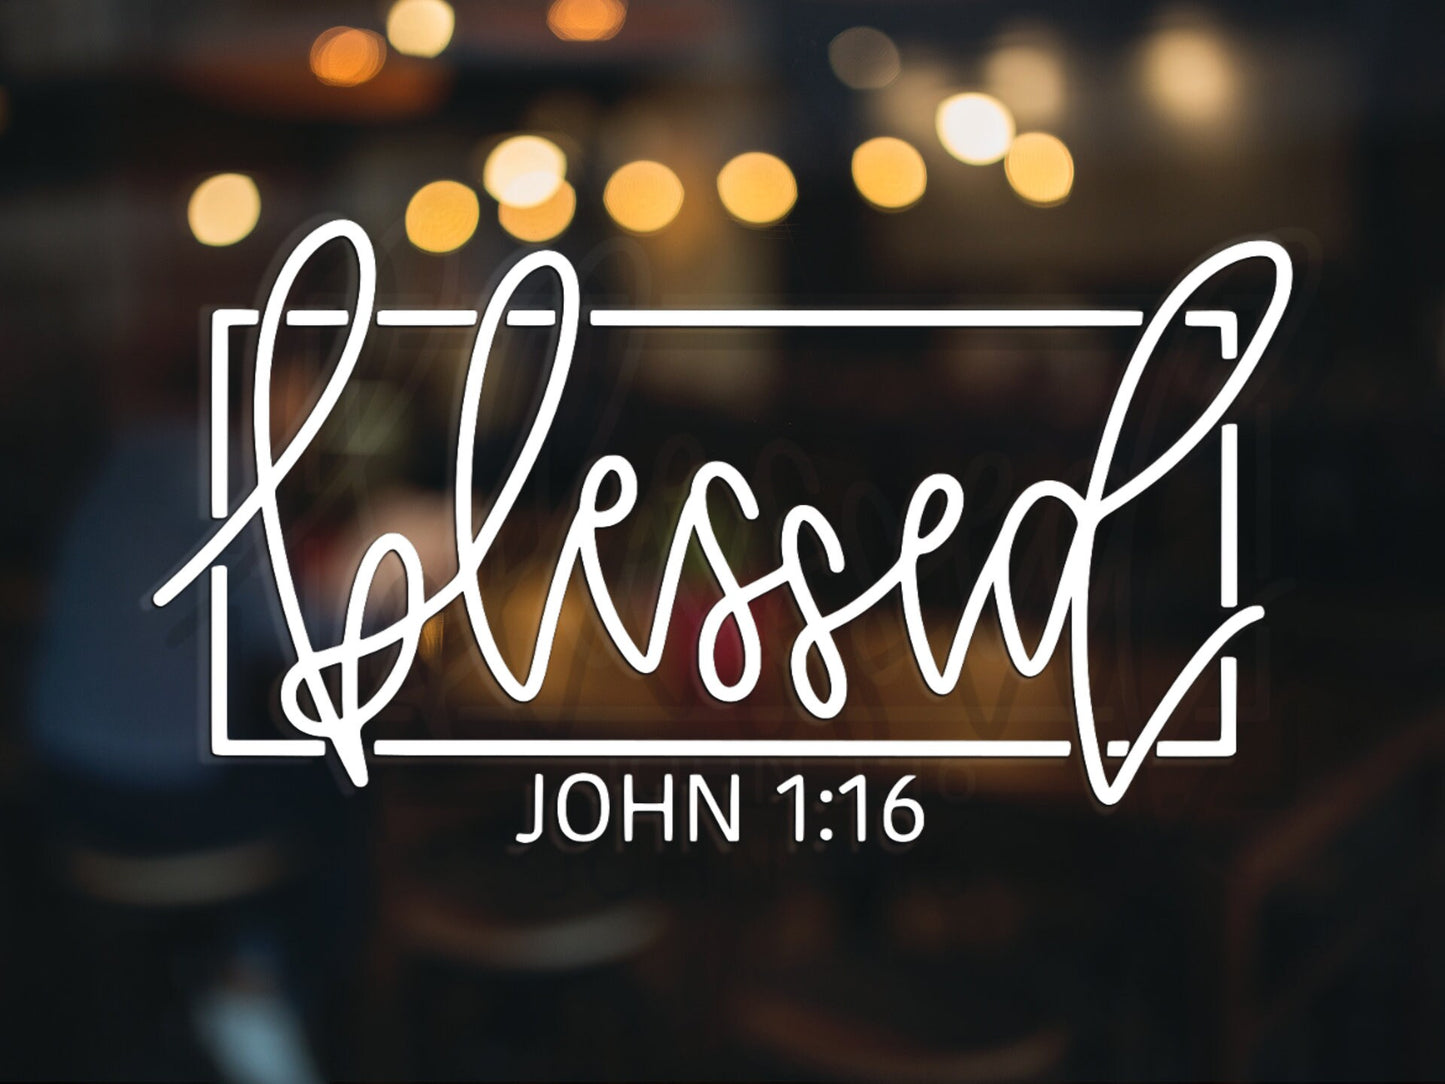 Blessed John 1:16 Decal - Many Colors & Sizes